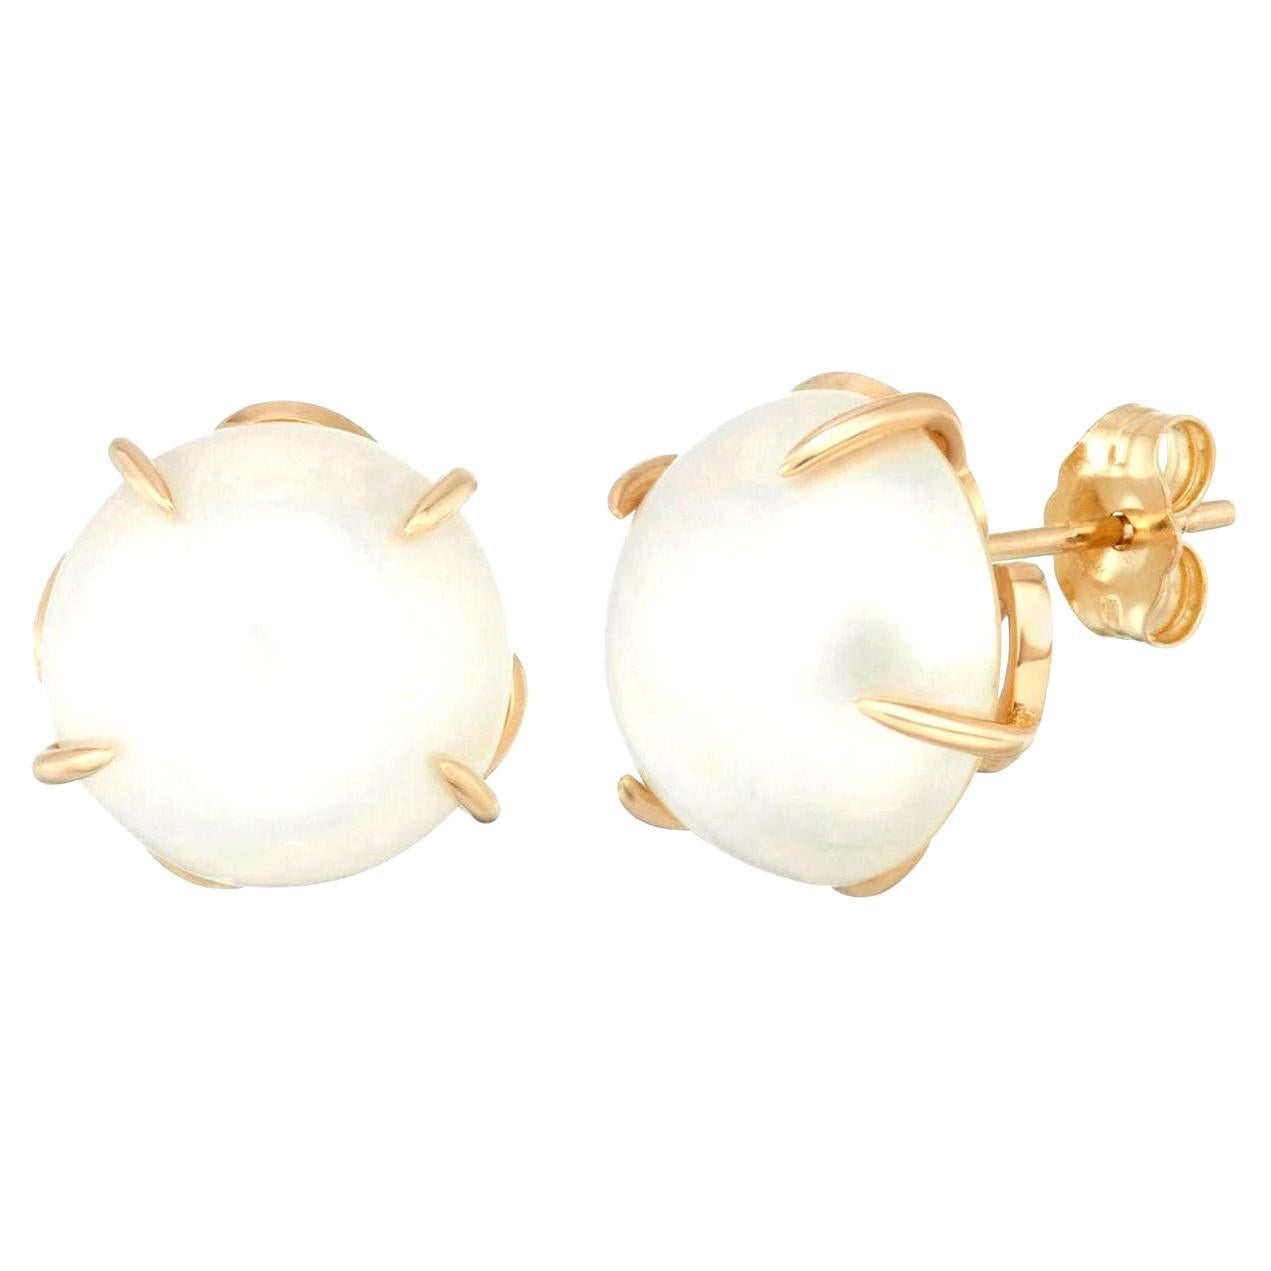 14 Karat Yellow Gold Cultured Mabe Pearl Stud Earrings